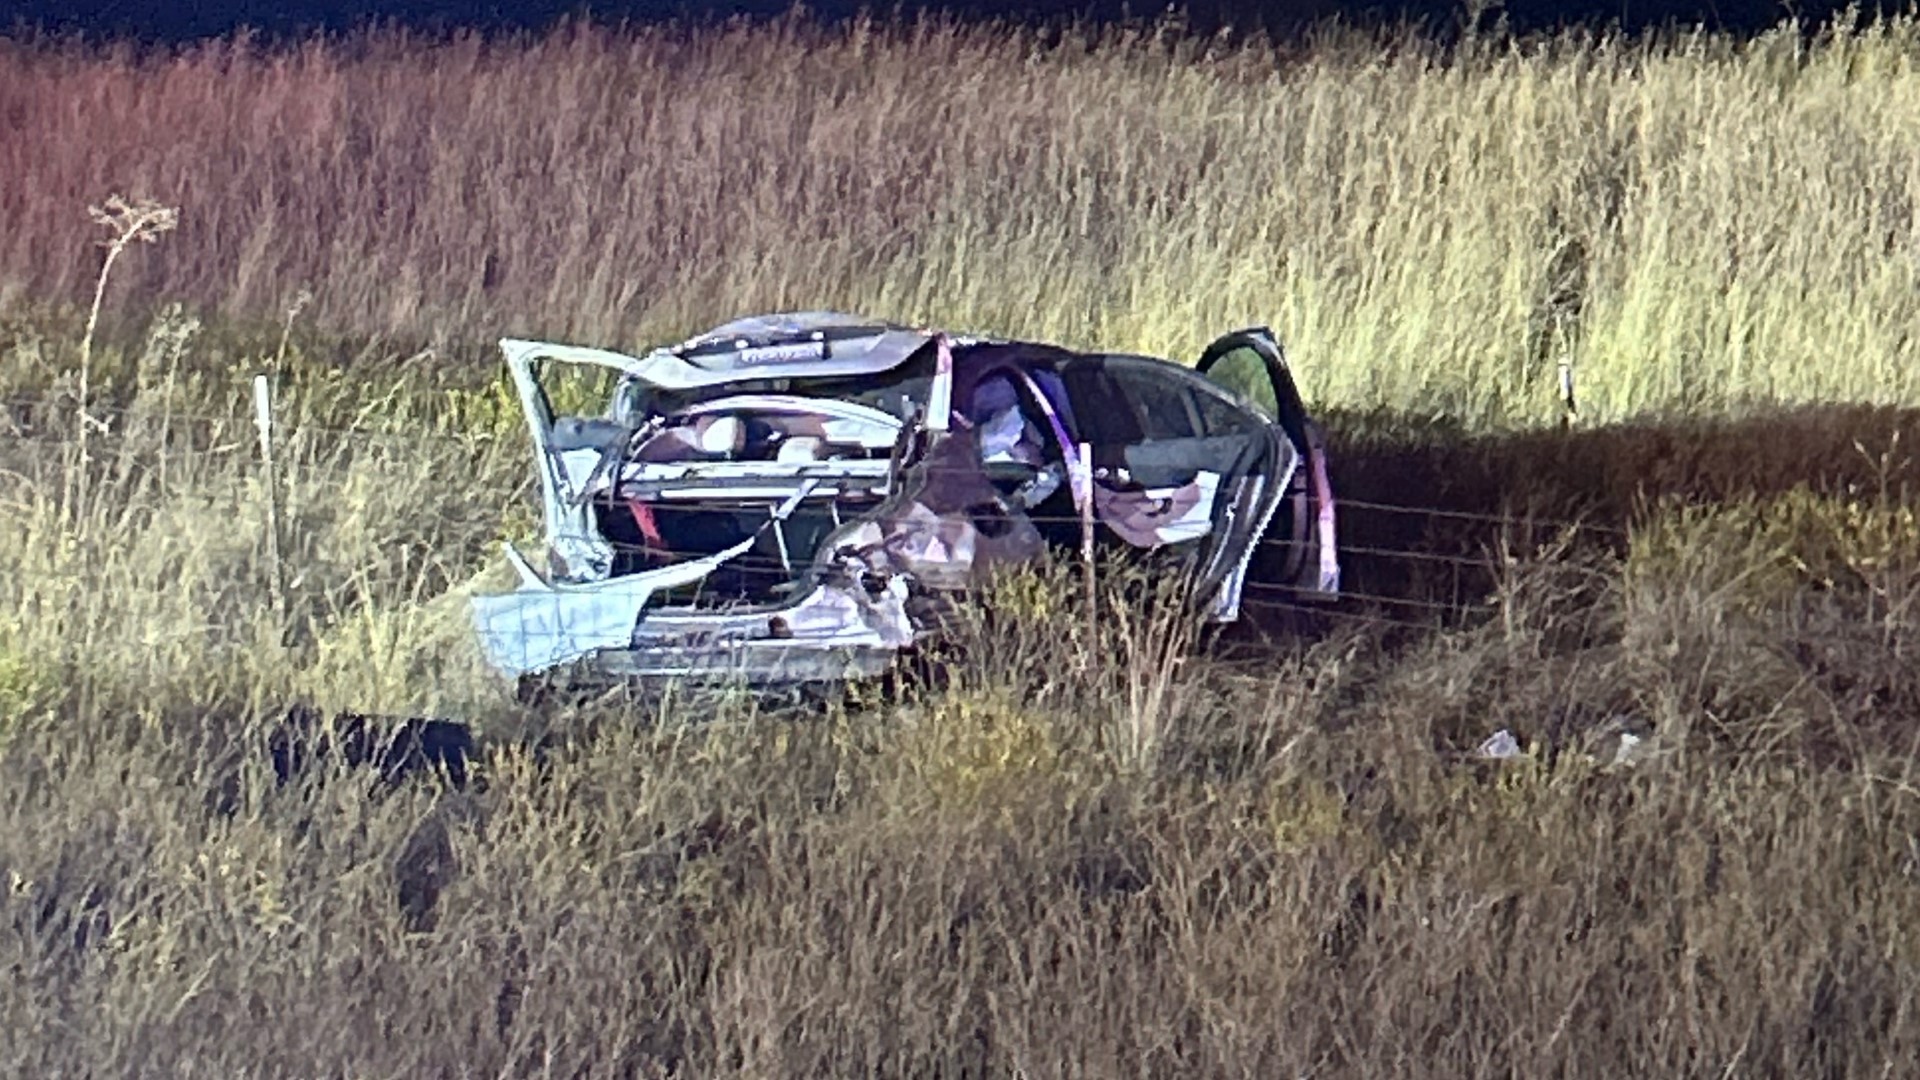 One person is dead after they were thrown from the car during a rollover crash in Rancho Cordova.